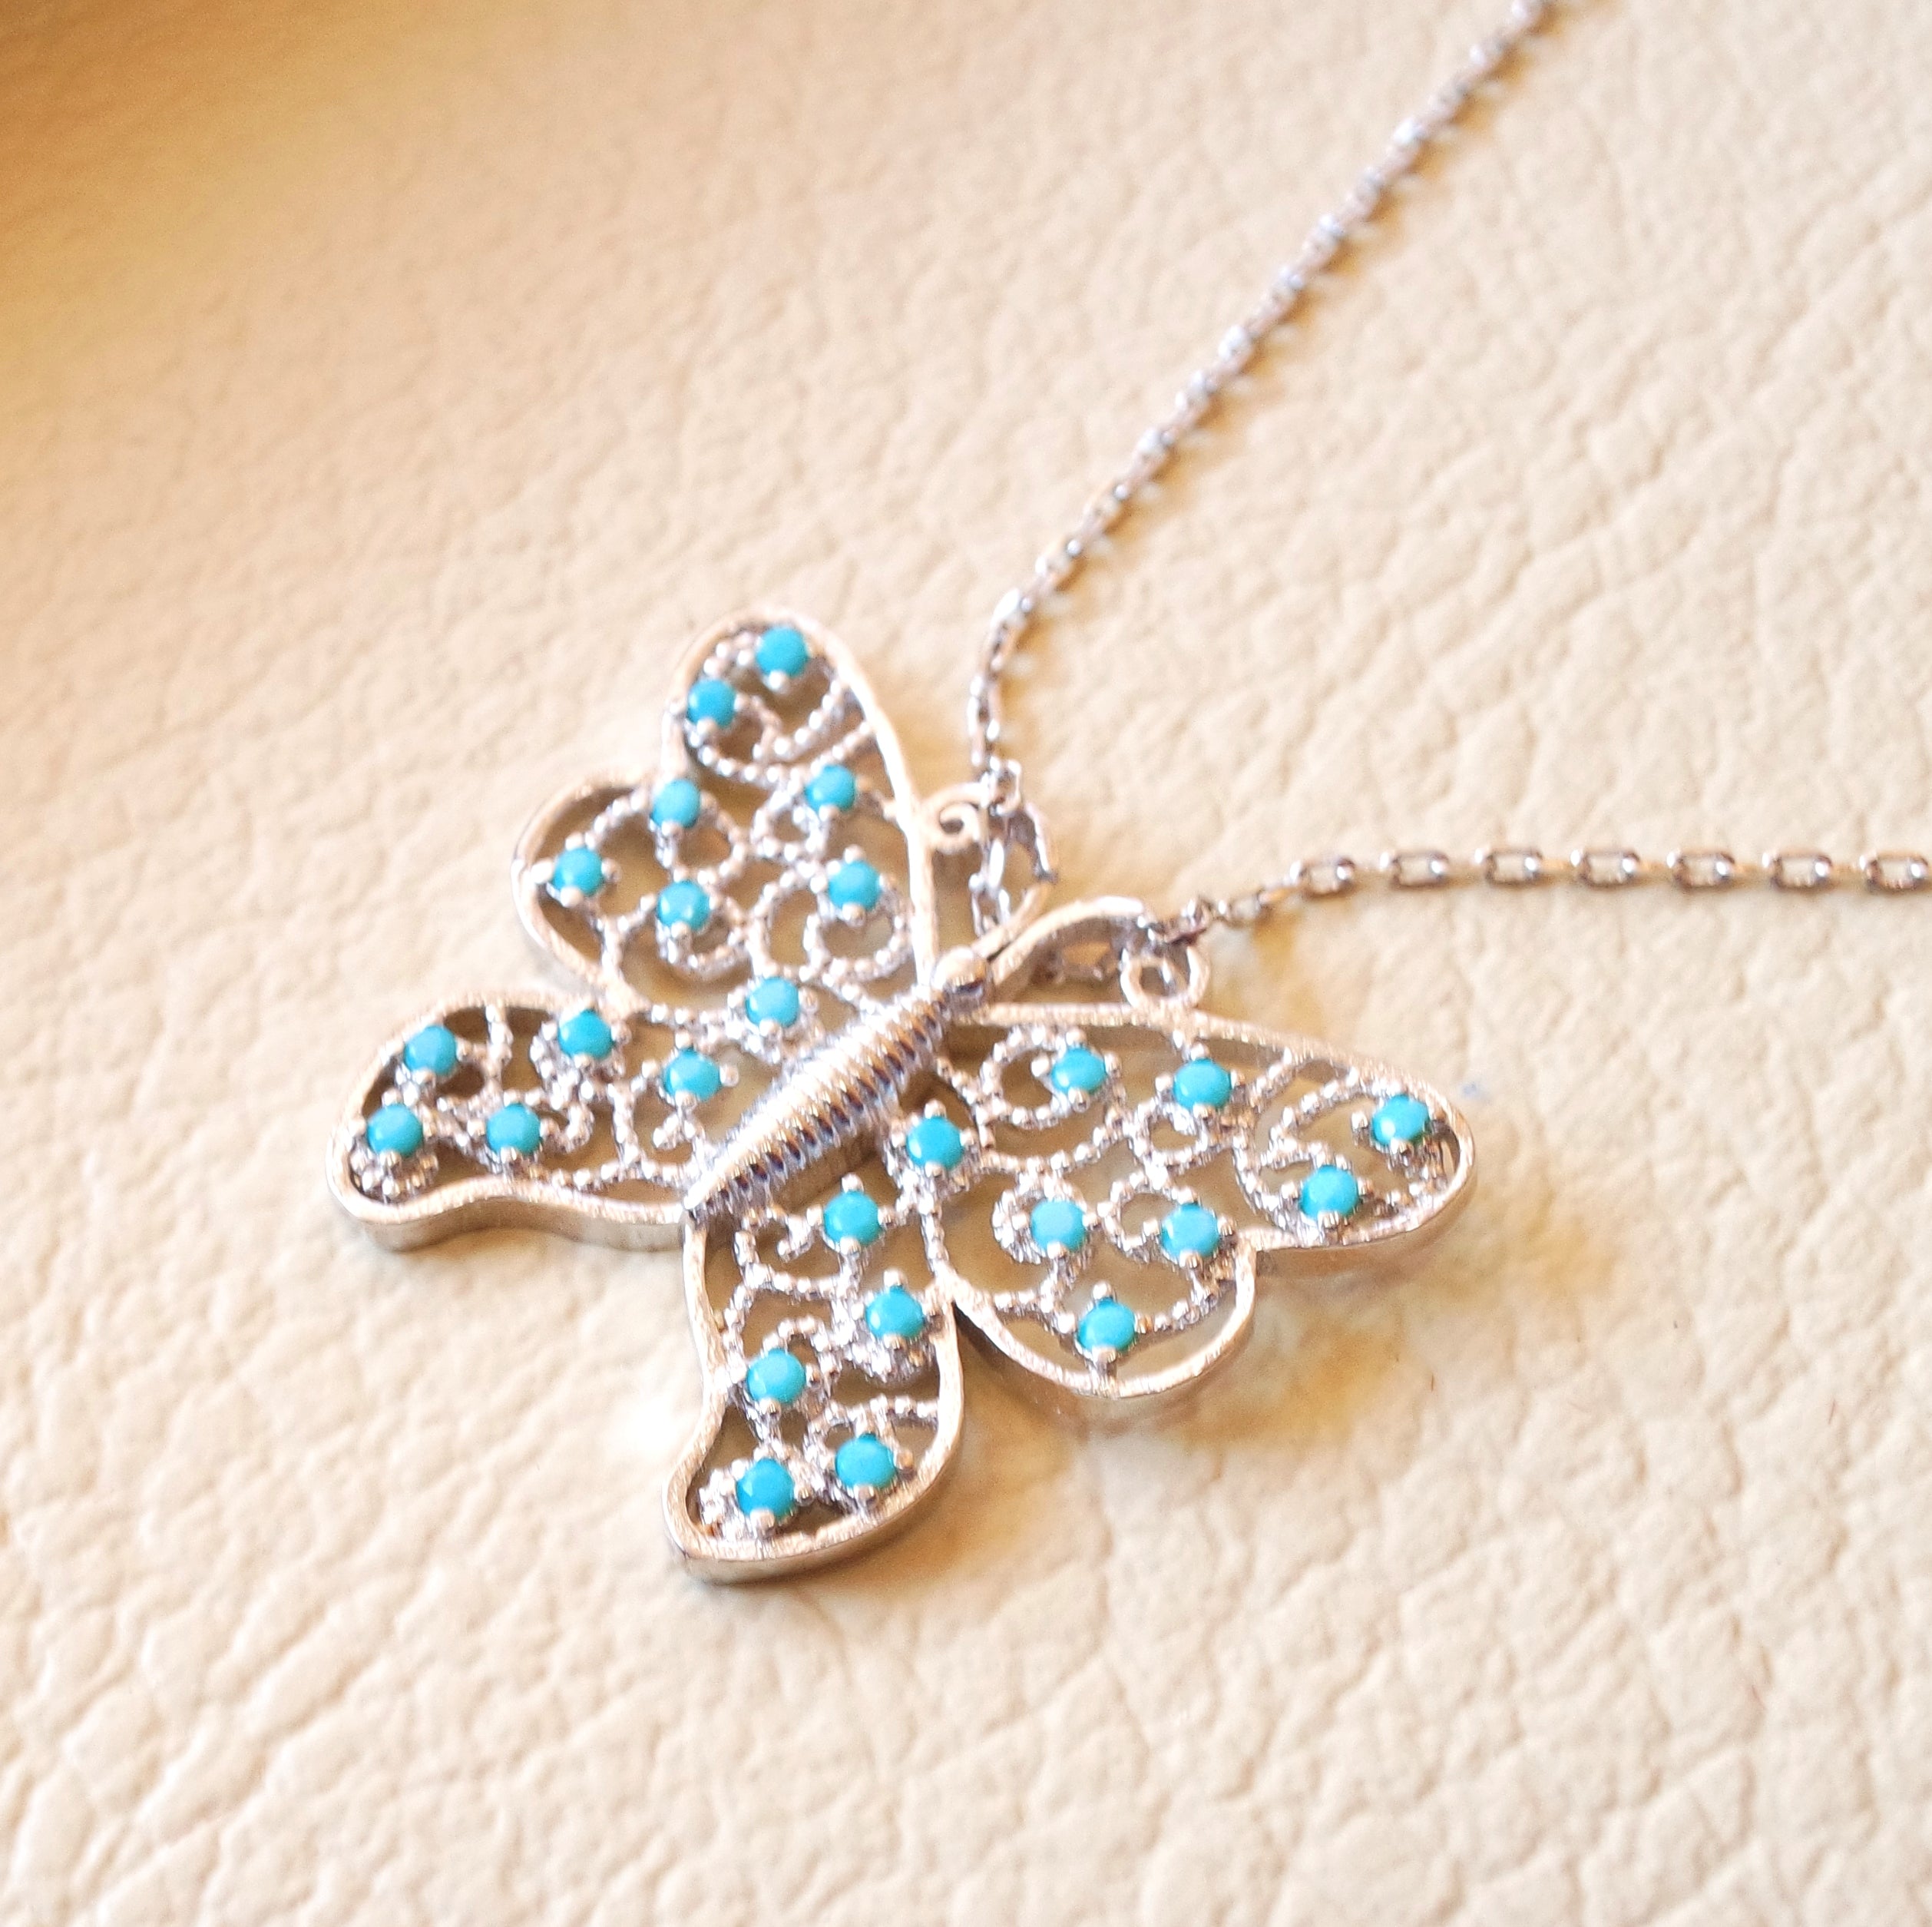 Butterfly necklace sterling silver 925 nano turquoise cubic zircon stones high quality chain